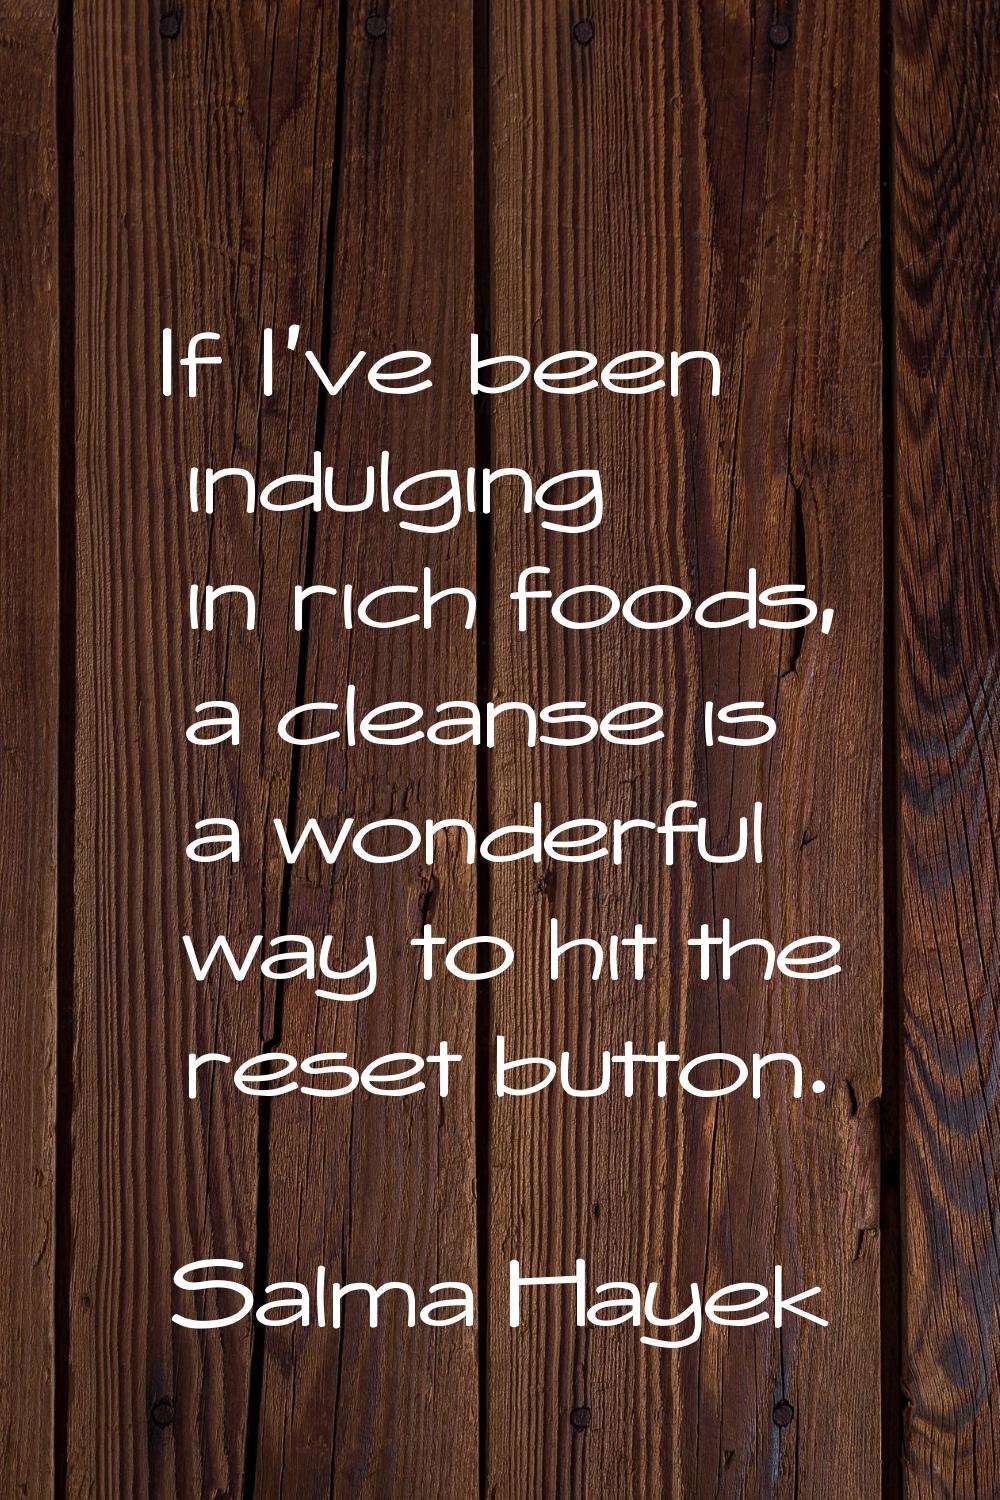 If I've been indulging in rich foods, a cleanse is a wonderful way to hit the reset button.